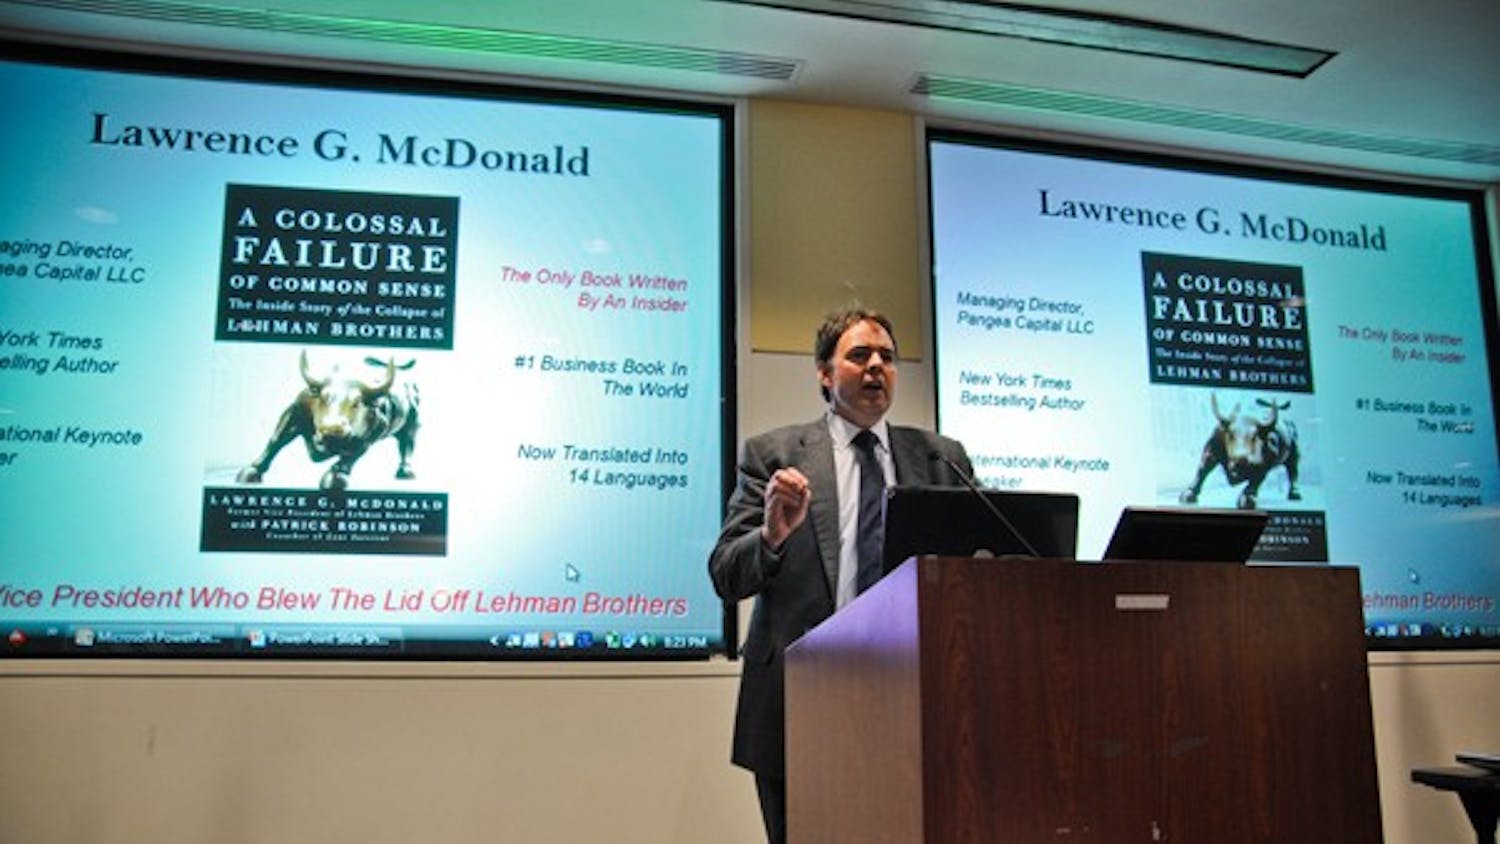 BROTHERS GRIM â€” Larry McDonald, who worked for the ill-fated Lehman Brothers investment bank, speaks at a KPU event about the companyâ€™s bankruptcy filing in September 2008. McDonald blamed the Board of Directors for the companyâ€™s inability to withstand the economic crisis and their subsequent downfall.